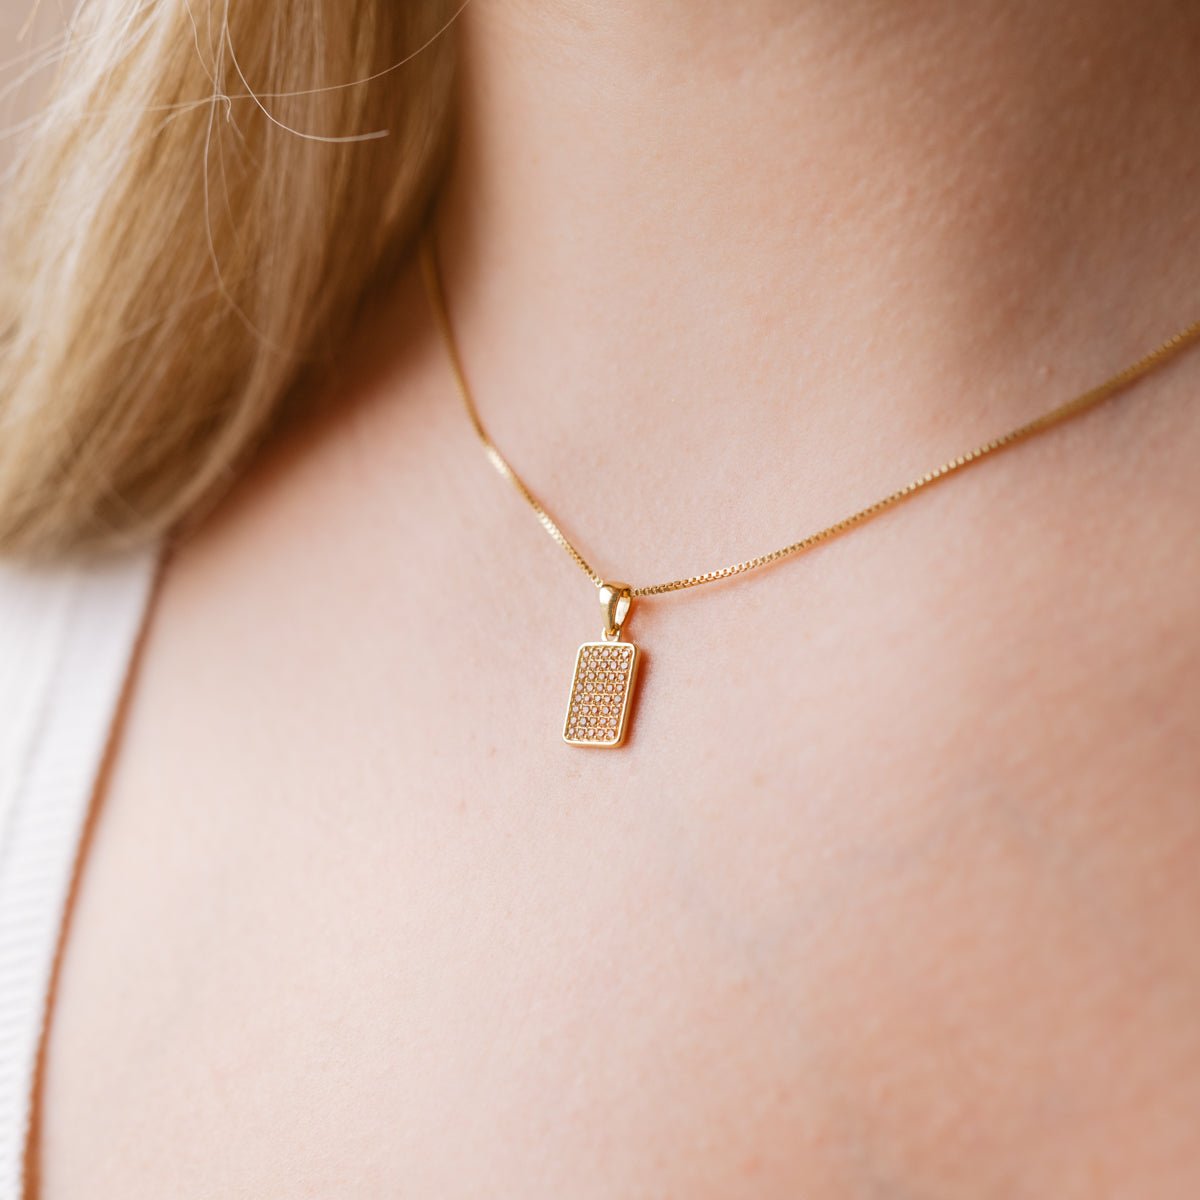 LOVE DAINTY DOG TAG NECKLACE - PEACH CUBIC ZIRCONIA & GOLD - SO PRETTY CARA COTTER